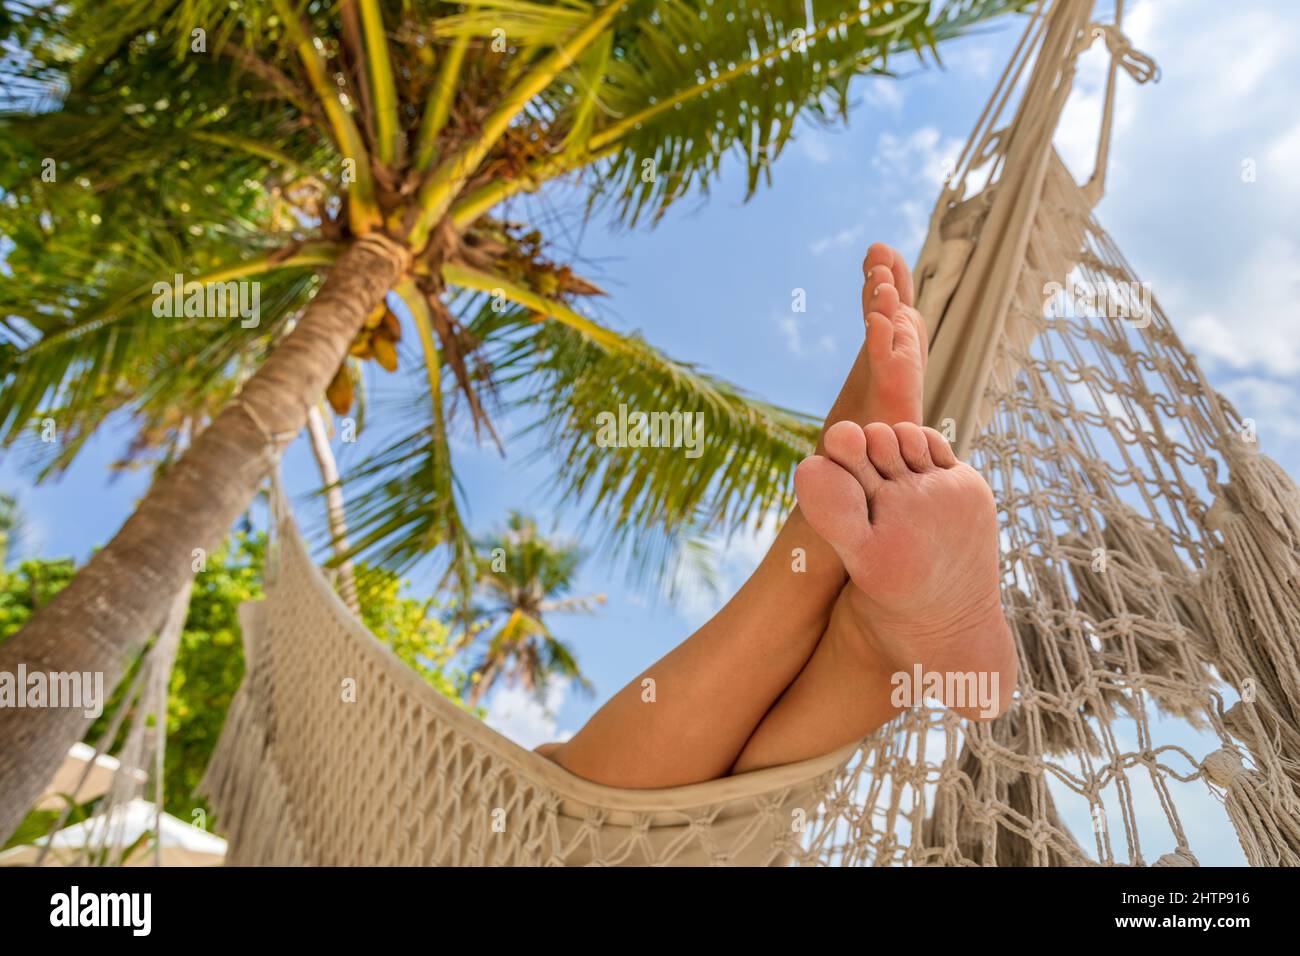 Relaxing beach vacation with woman's feet in hammock between coconut palm tree. Exotic tropical island hotel resort. Sunny warm day with blue sky. Stock Photo